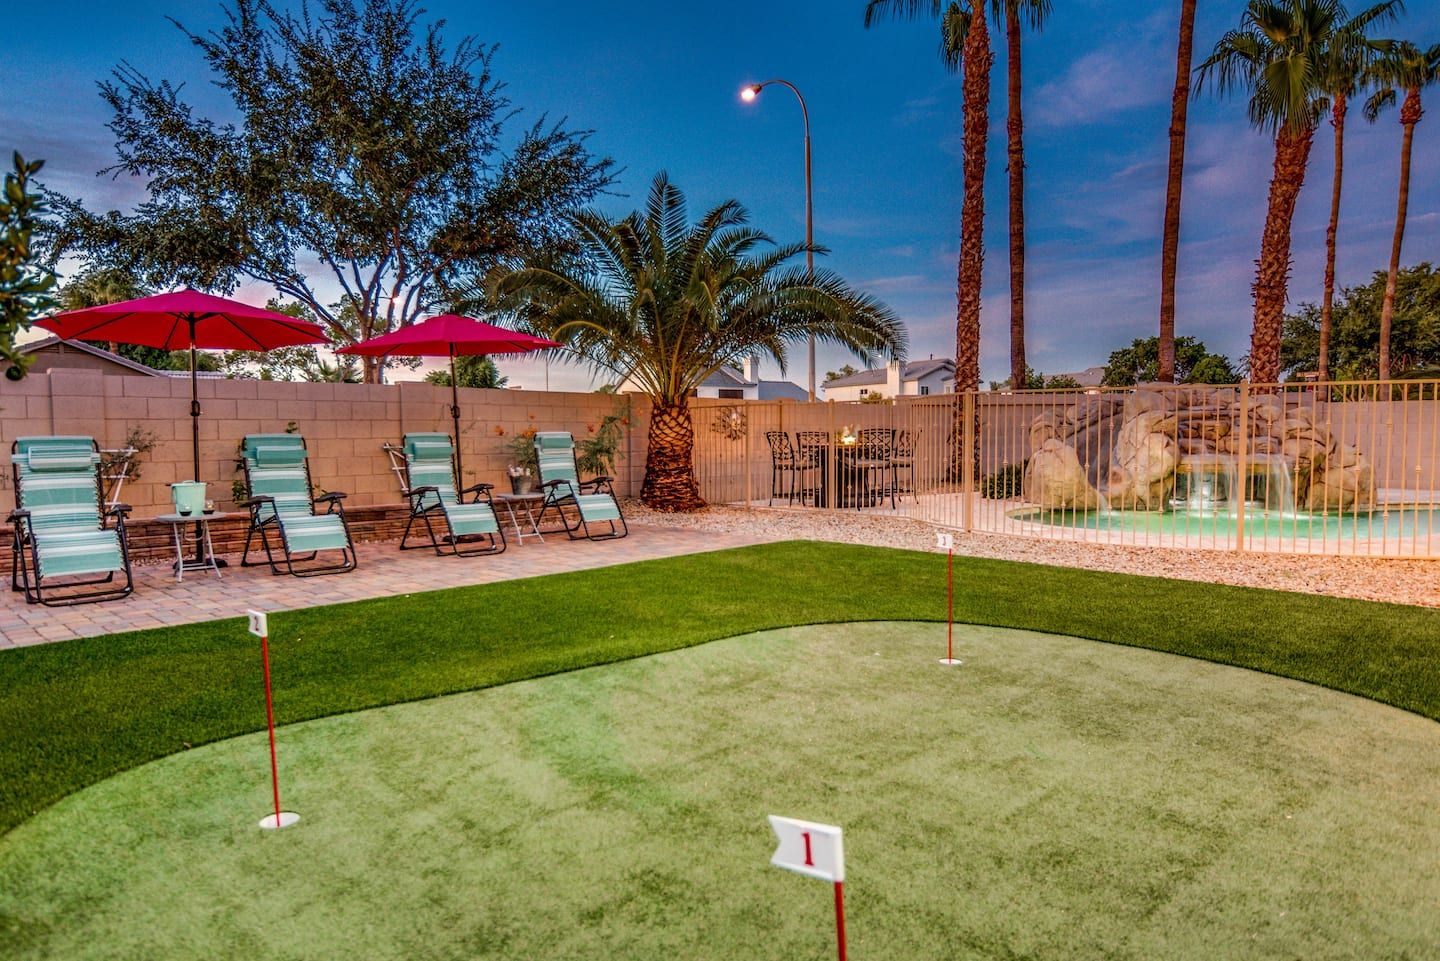 A backyard scene at sunset featuring a small putting green with numbered holes, meticulously laid by top artificial grass installers. Several lounge chairs with side tables and red umbrellas are near a wall adorned with palm trees. In the background, a lit pool area with rocks and additional palm trees completes this Jacksonville, FL oasis.